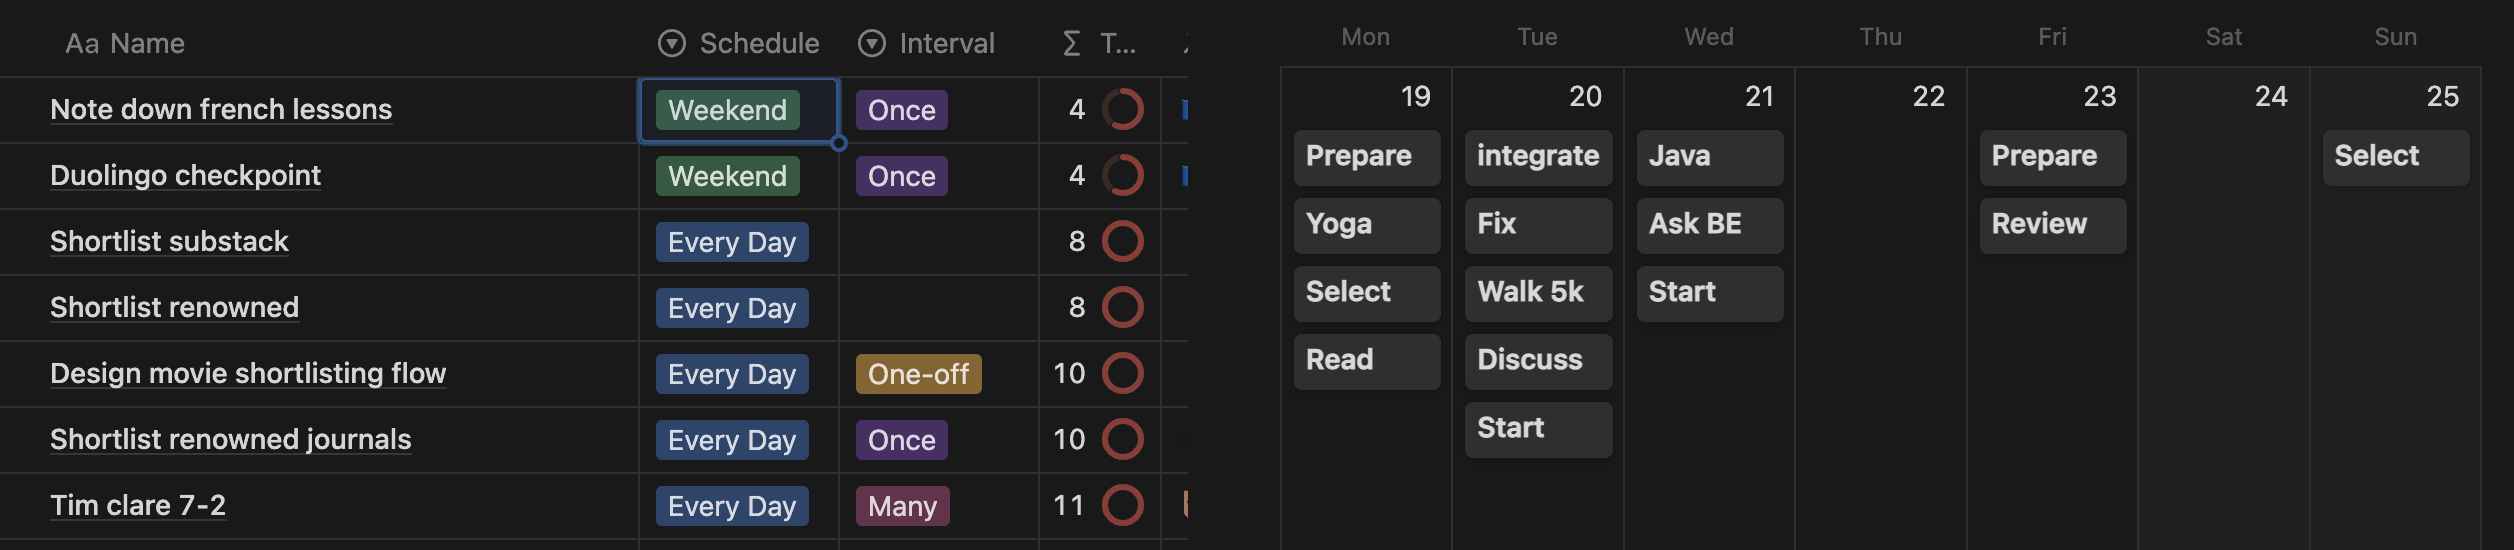 My tasks list in the left with properties to show the created time, frequency and schedule. With a week calendar on the right showing the completed items on each day